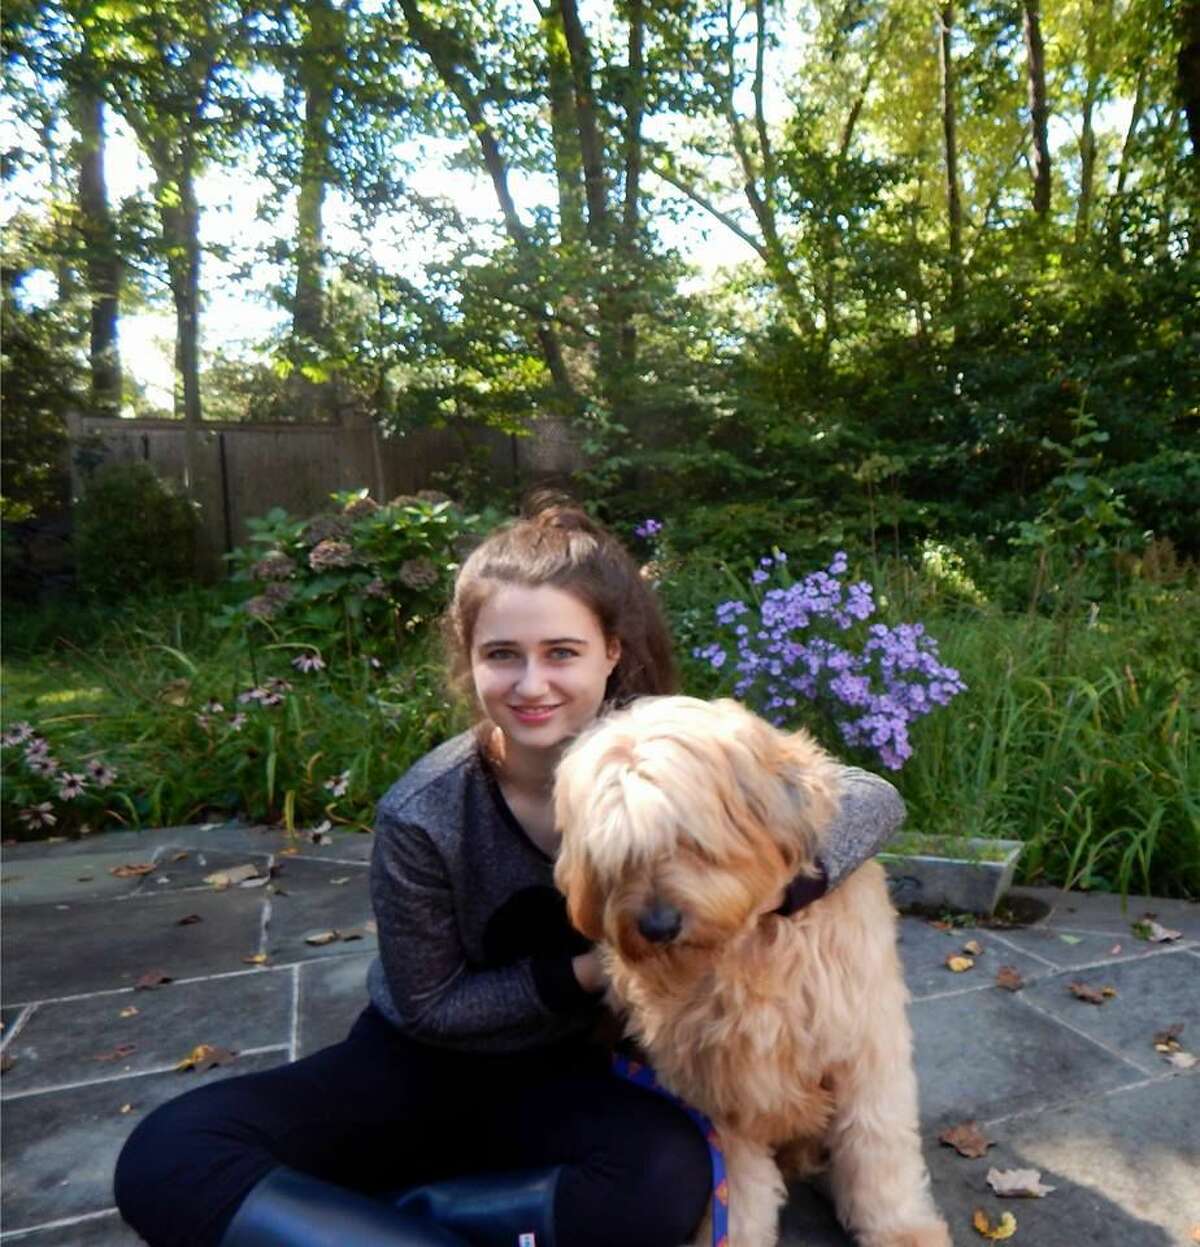 Annie Blumenfeld with Teddy, in a photo from the Wags 4 Hope Facebook page.